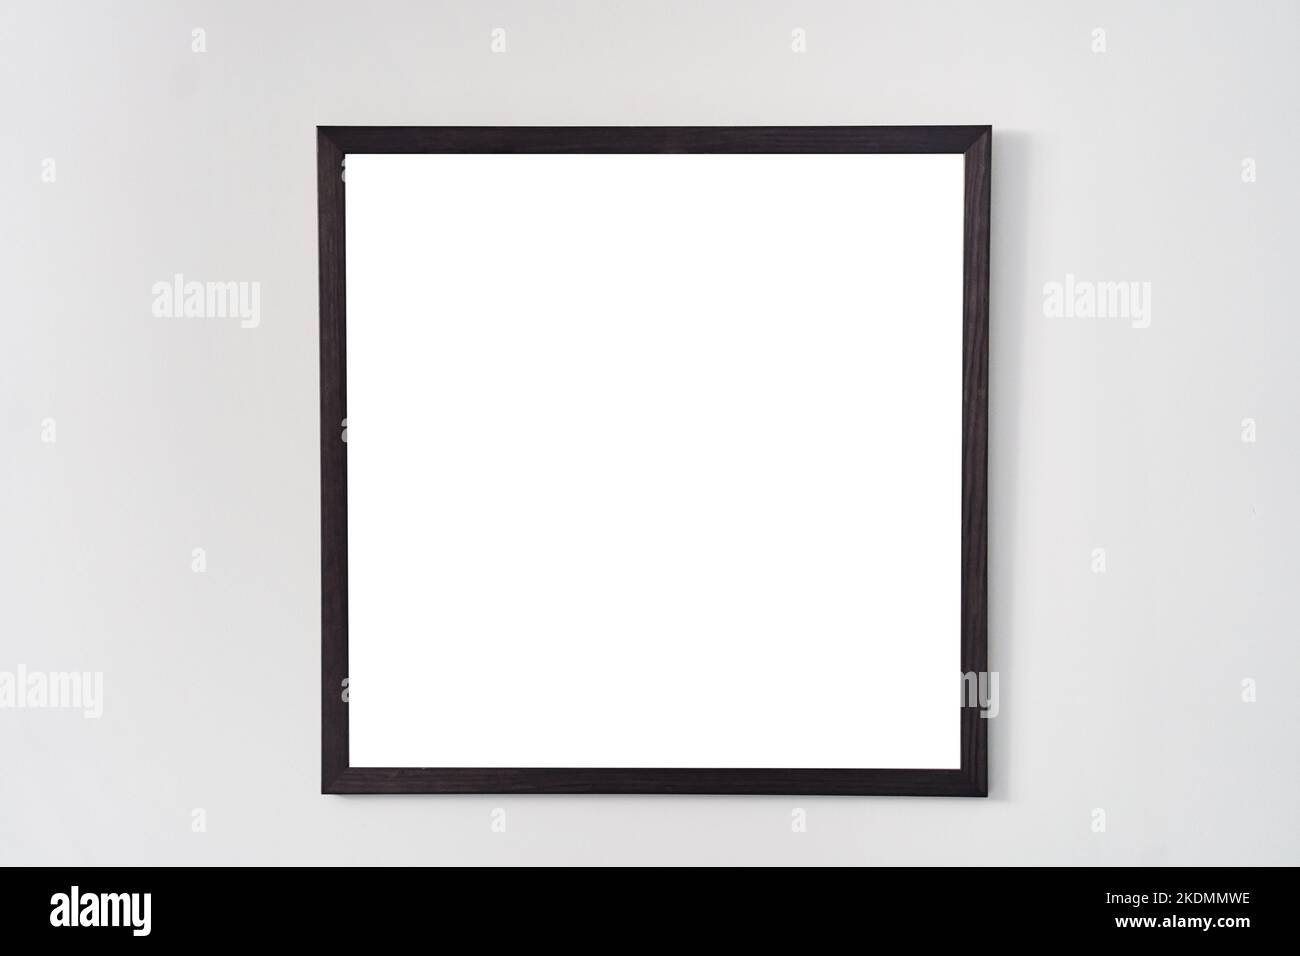 An empty square photo frame with a black border hanging on a white wall Stock Photo